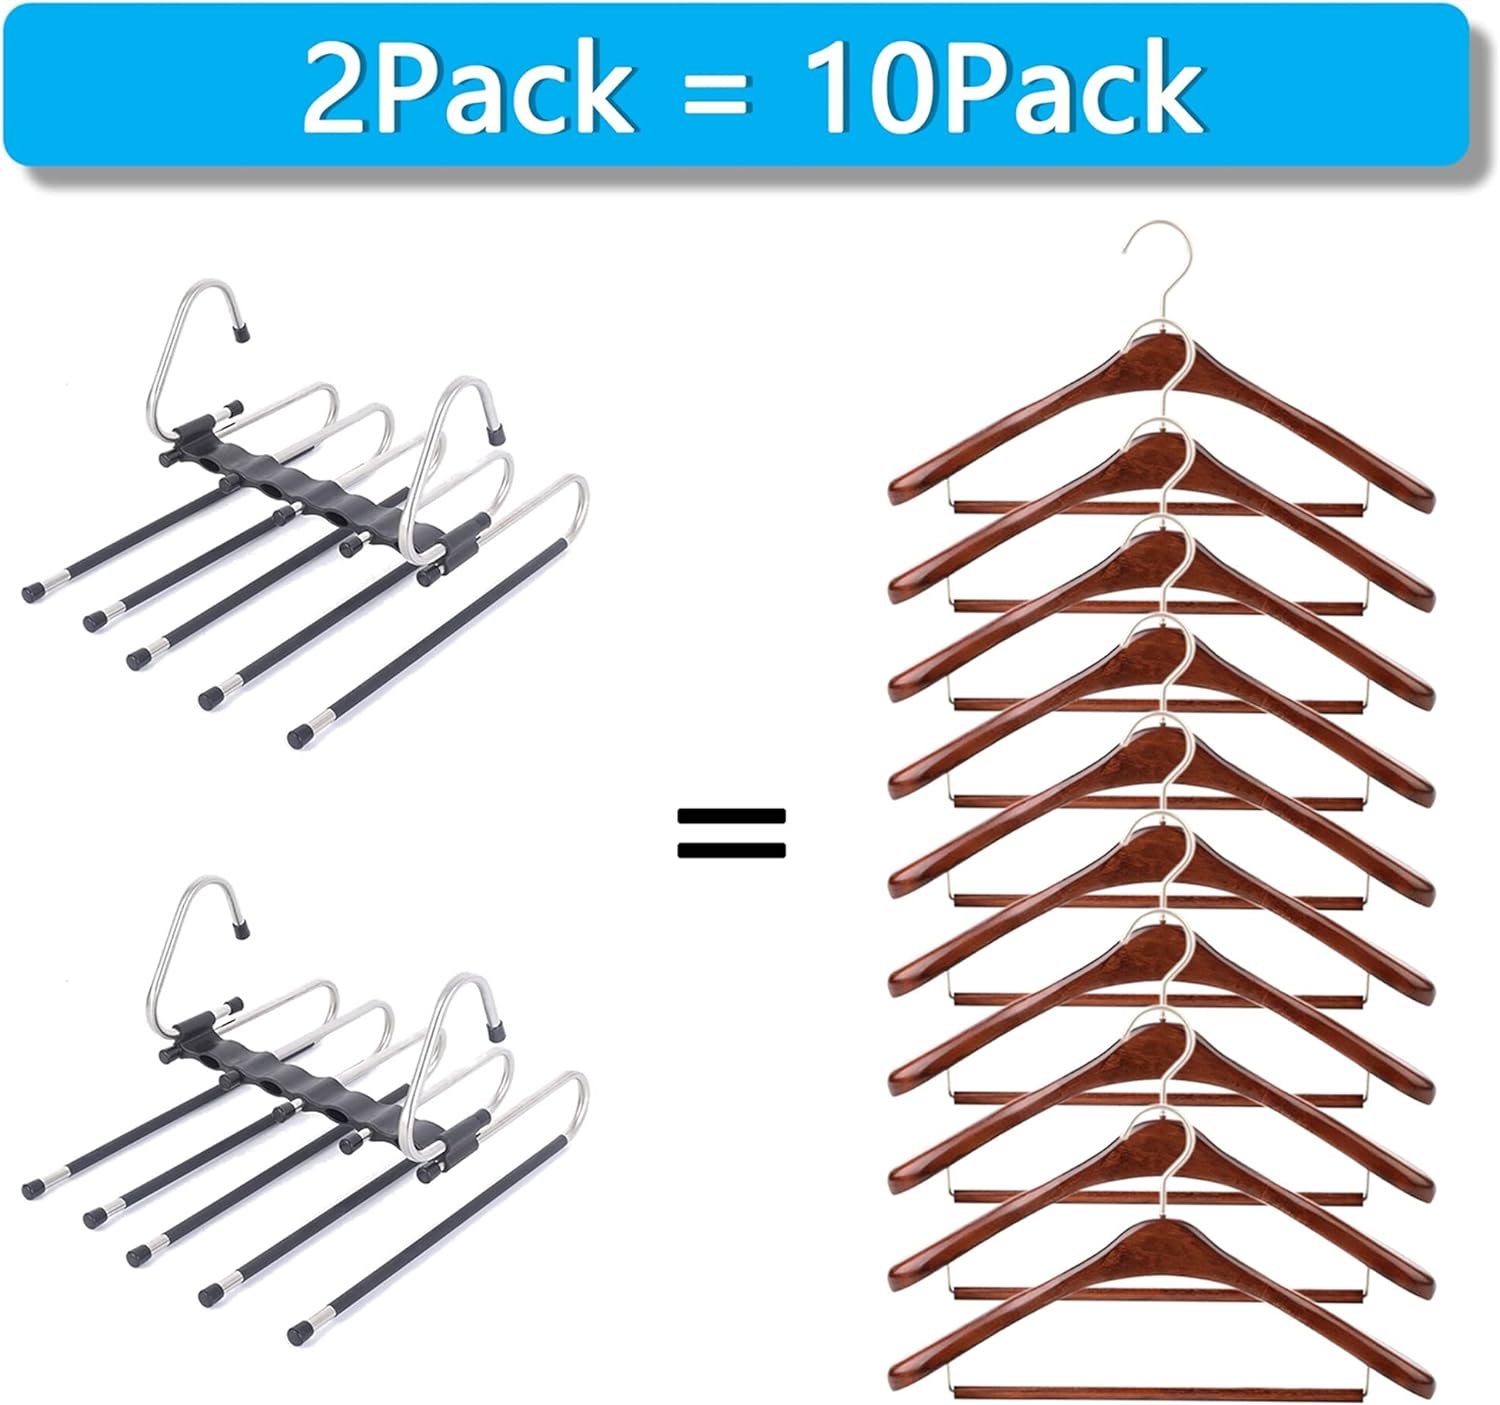 Magic Pants Hangers Space Saving - 2 Pack for Closet Multiple Layers Multifunctional Uses Rack Organizer for Trousers Scarves Slack (2 Pack with 10 Metal Clips)6